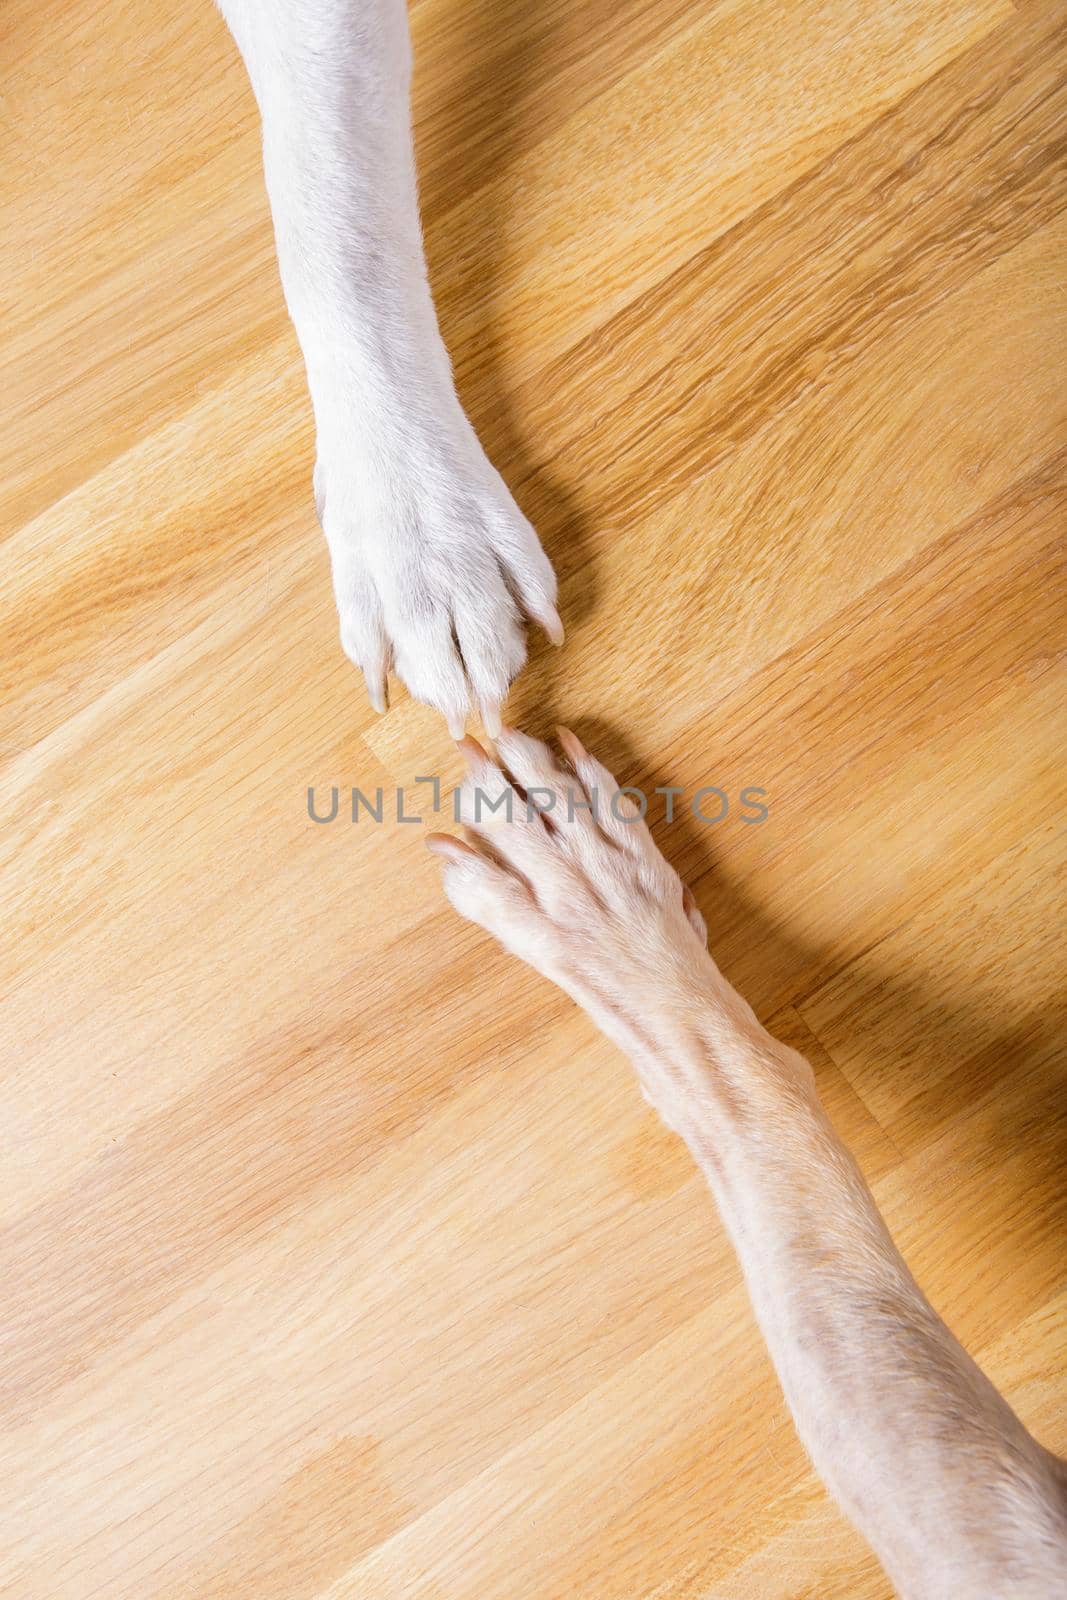 dog and owner handshaking by Brosch